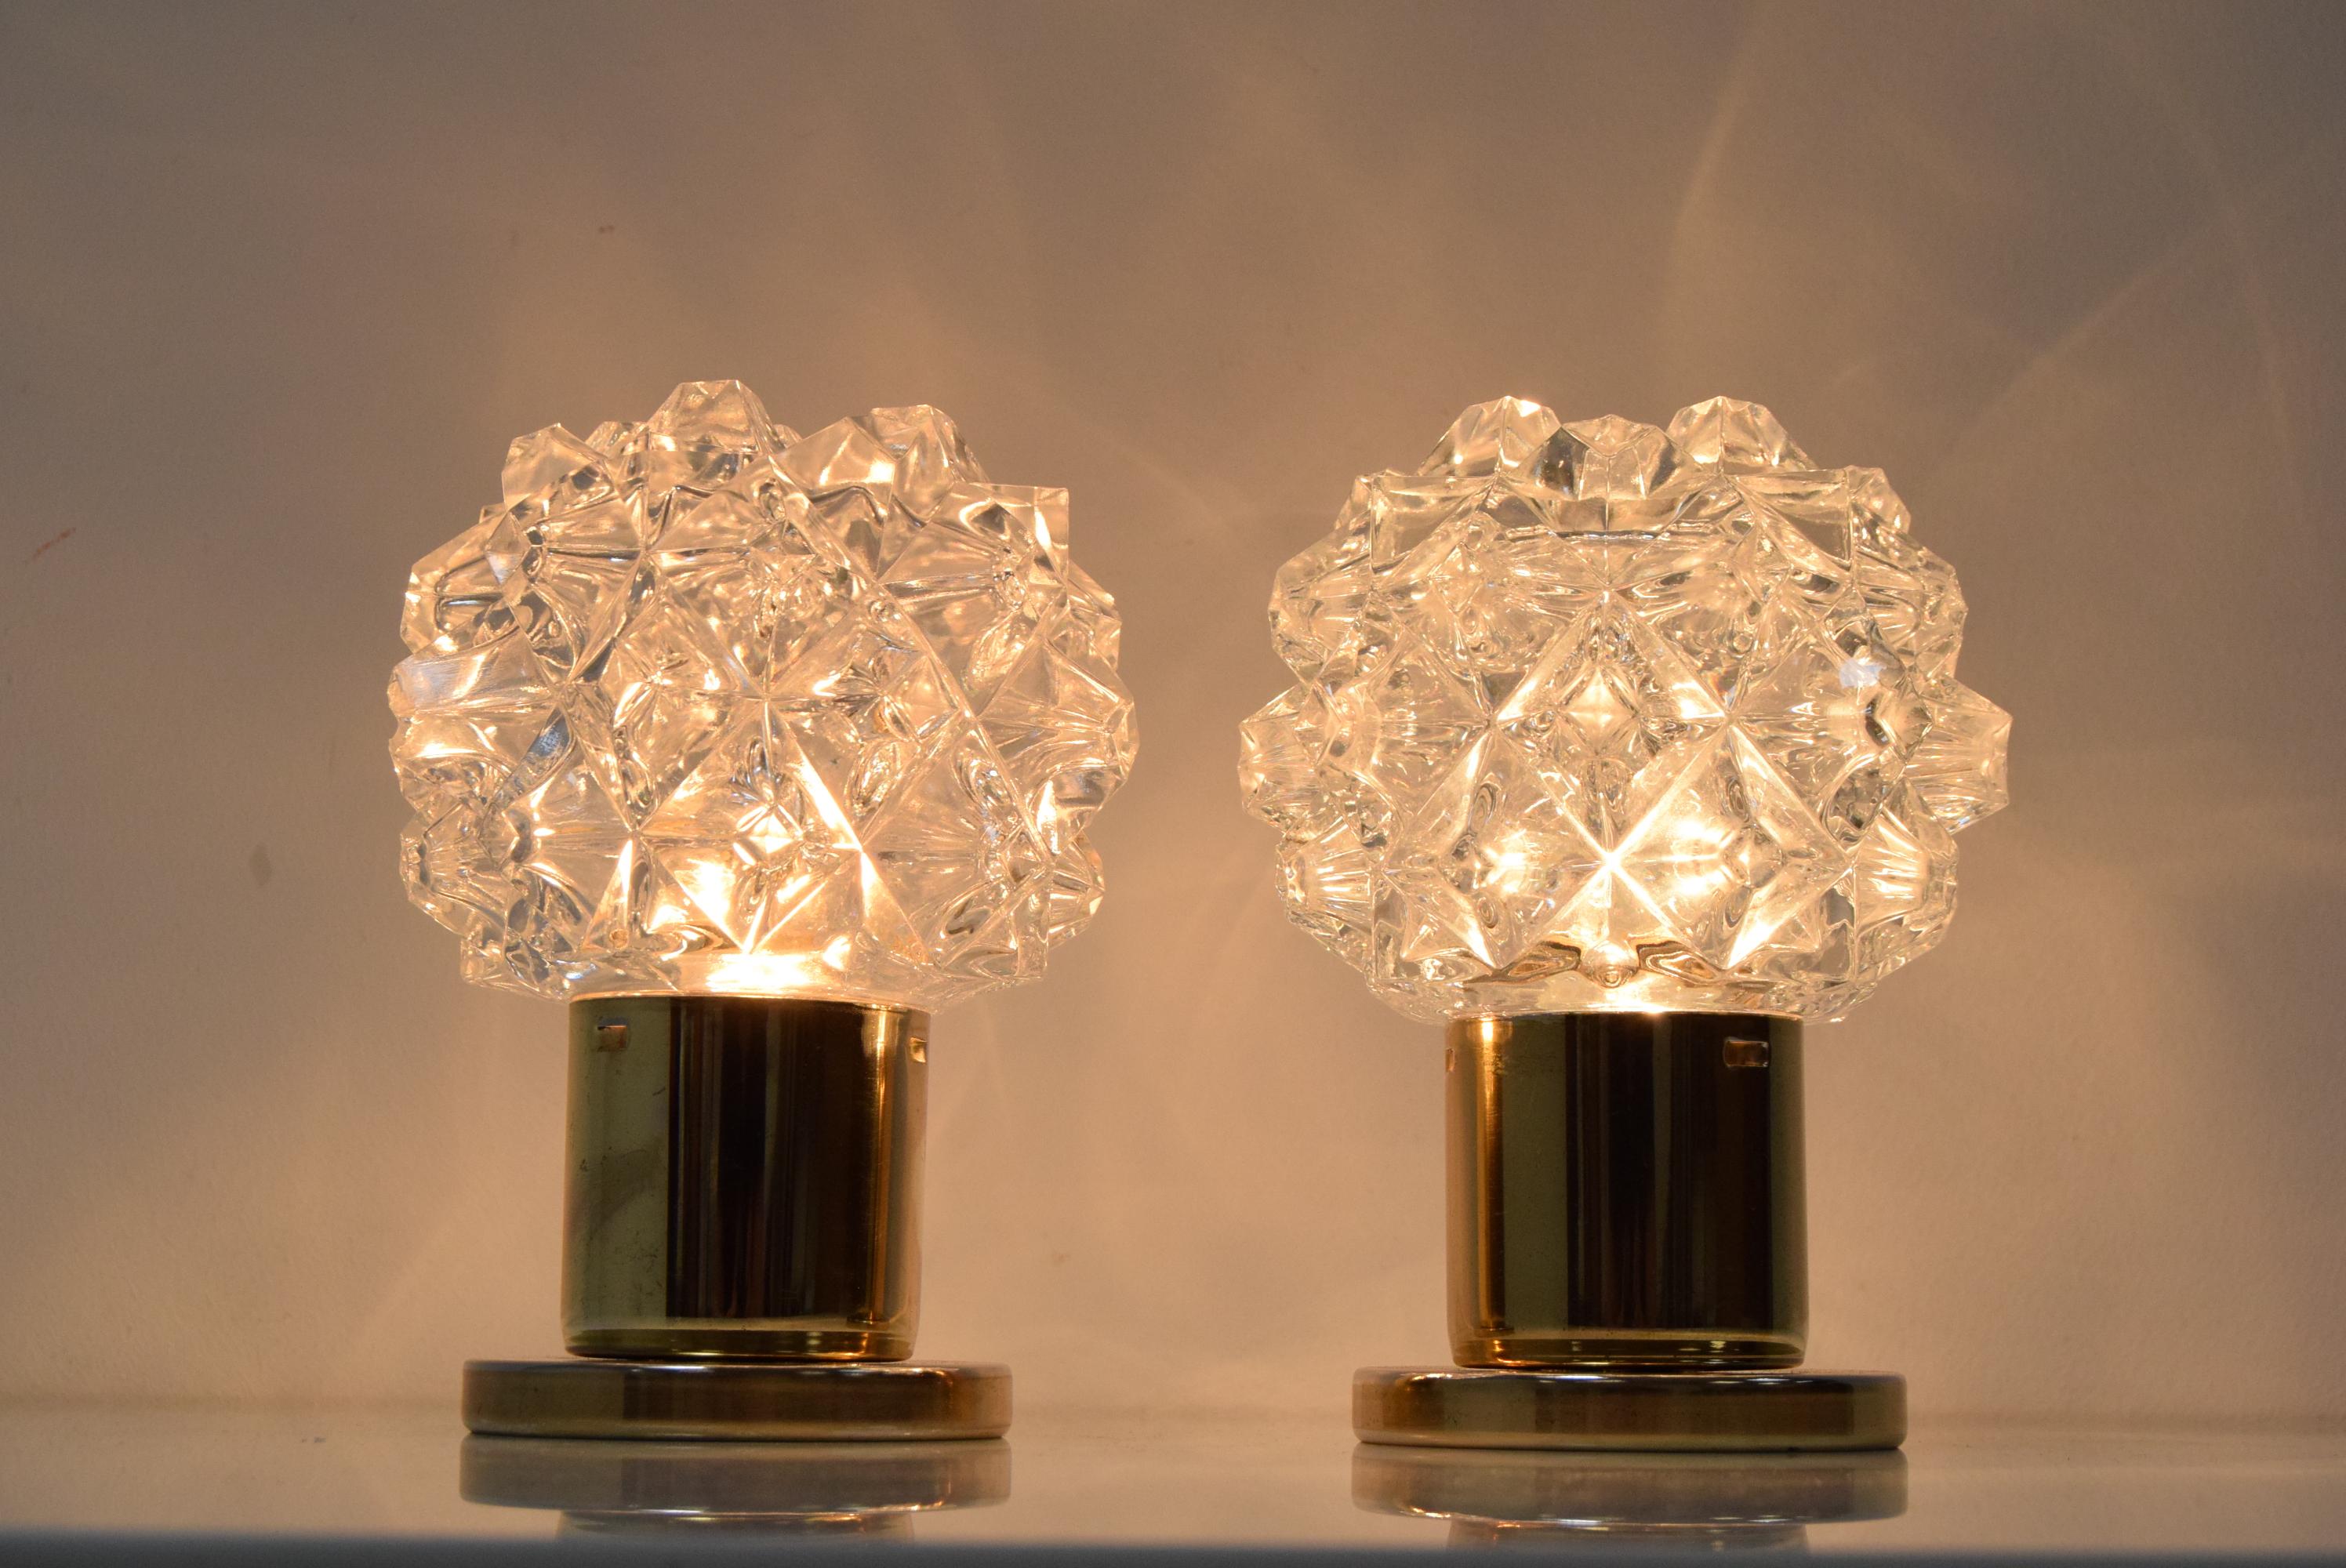 Pair of Design Table or Wall Lamps by Preciosa, Kamenicky Senov, 1960's. For Sale 5